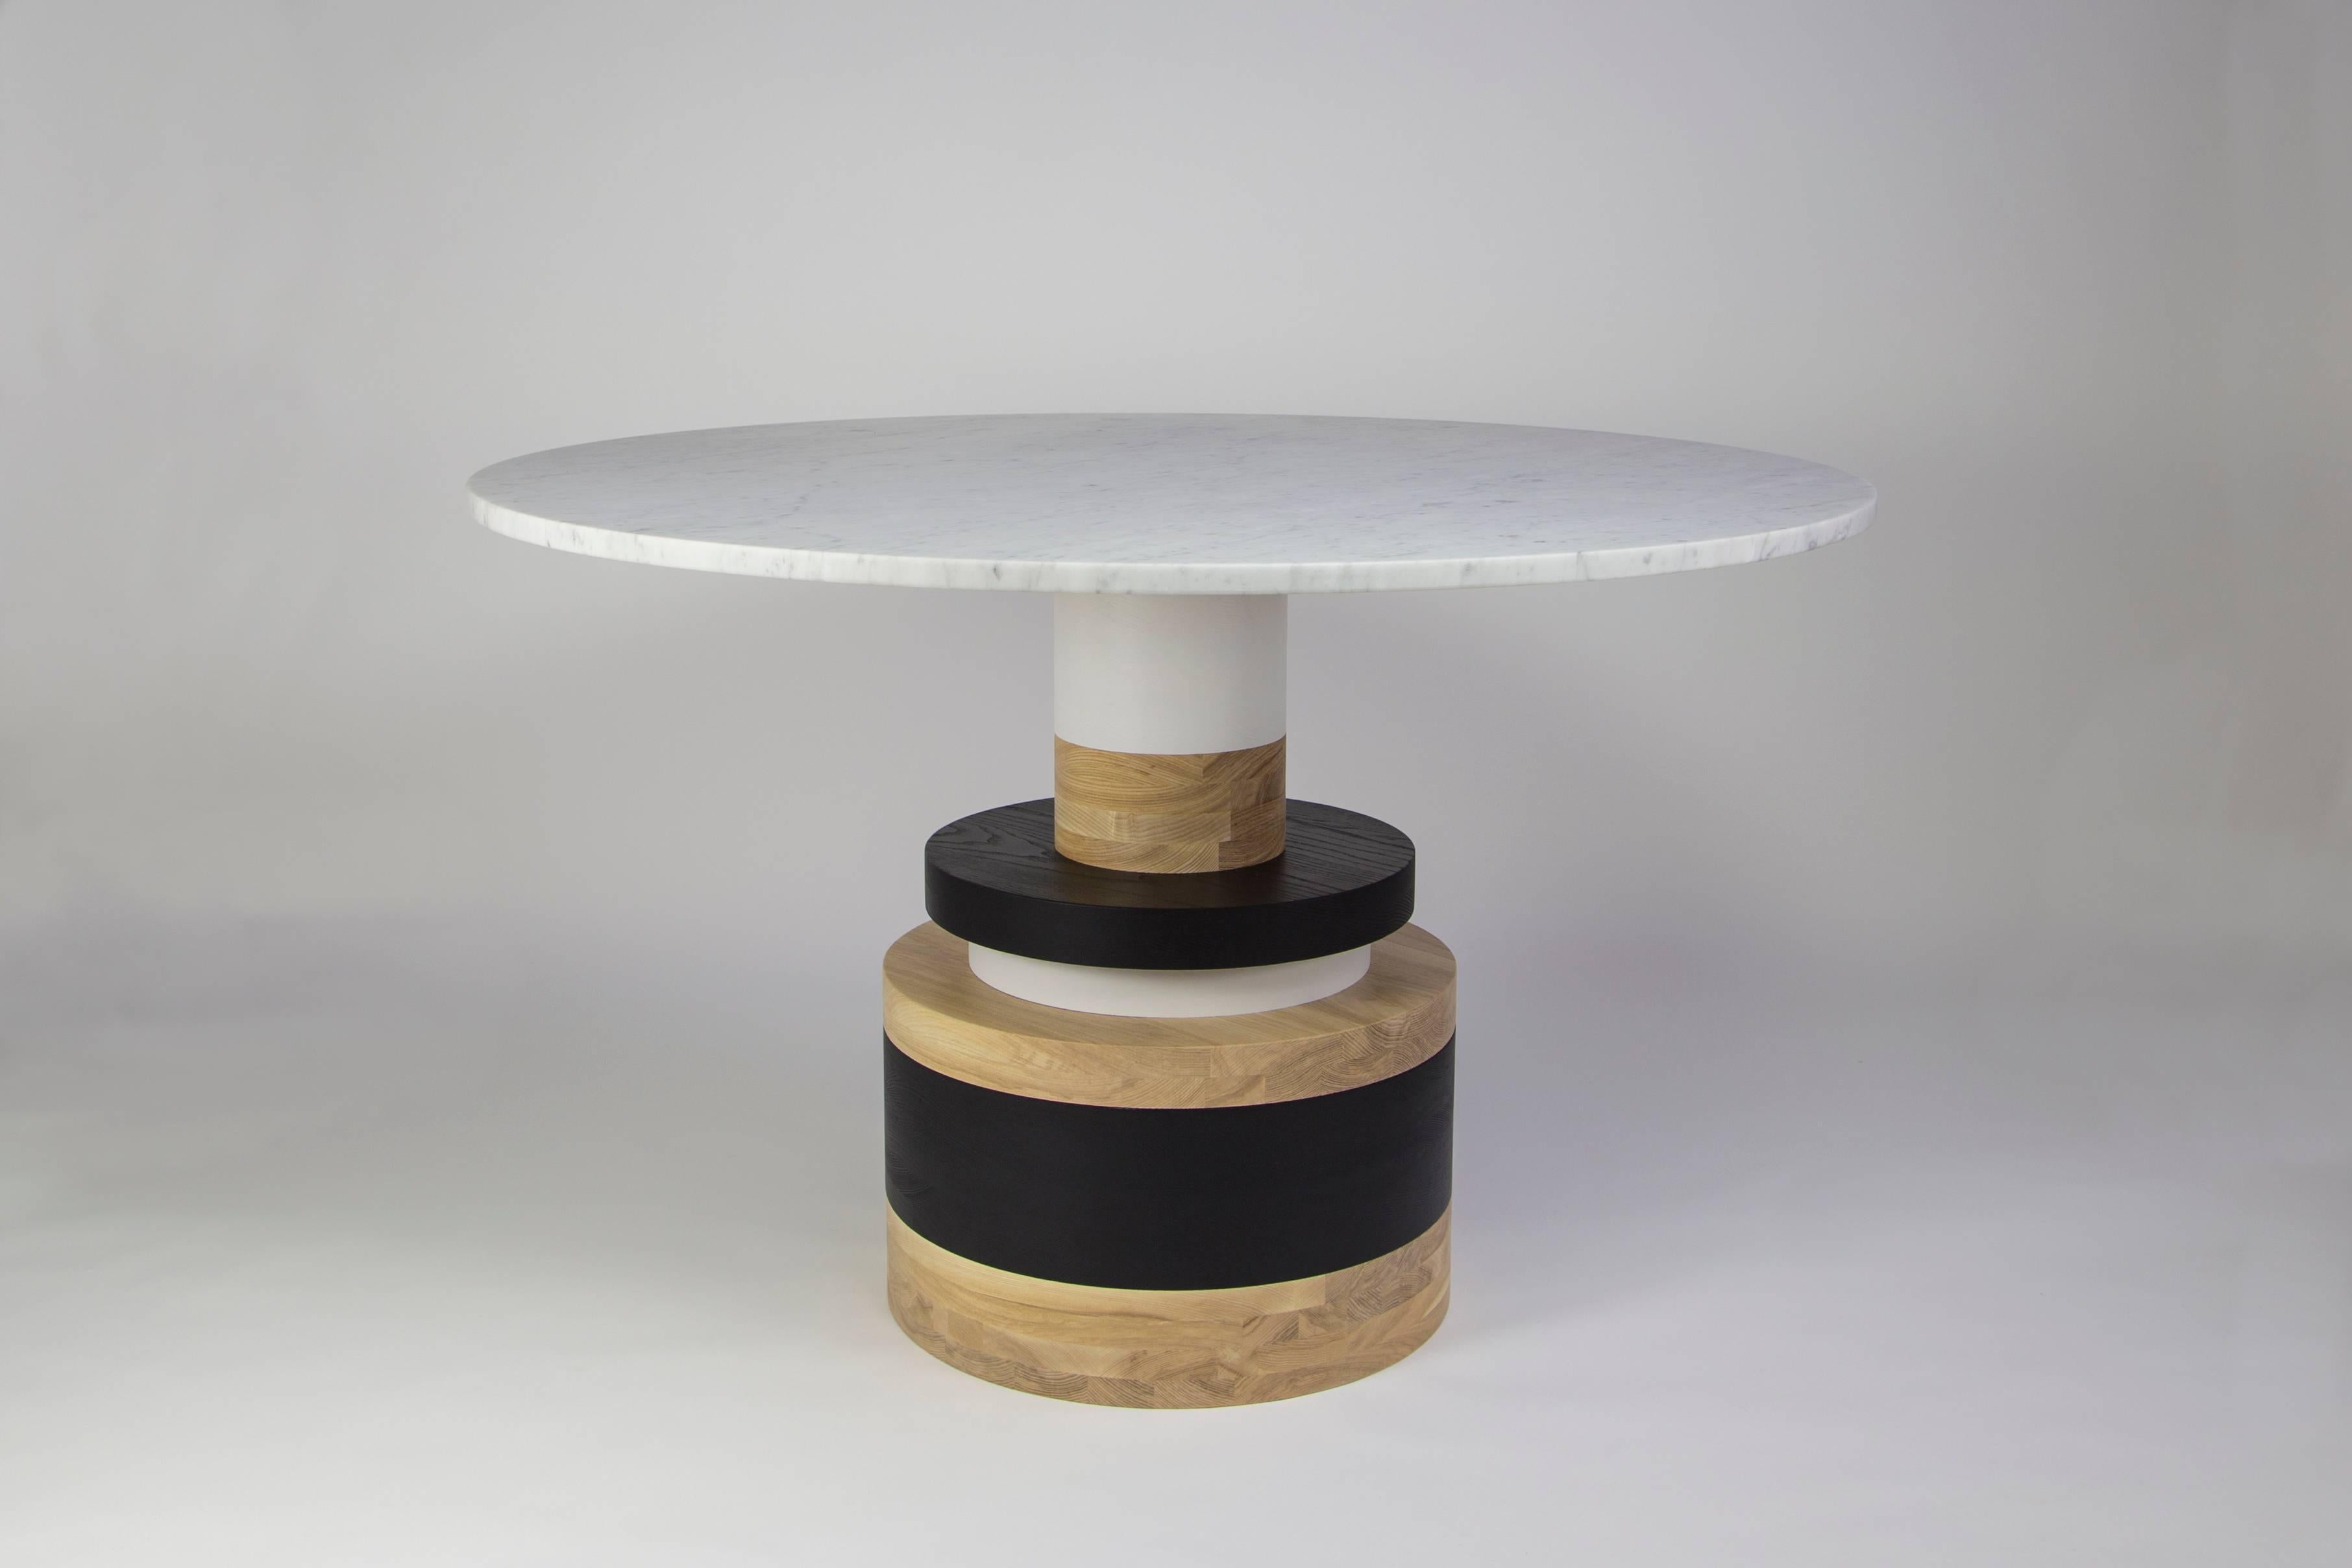 The Sottsass-inspired “Sass Dining Table” is a bold, graphic statement piece. A honed Carrara marble top sits on an Amish-made base composed of painted and stacked wood circles. 

The version as shown is 47